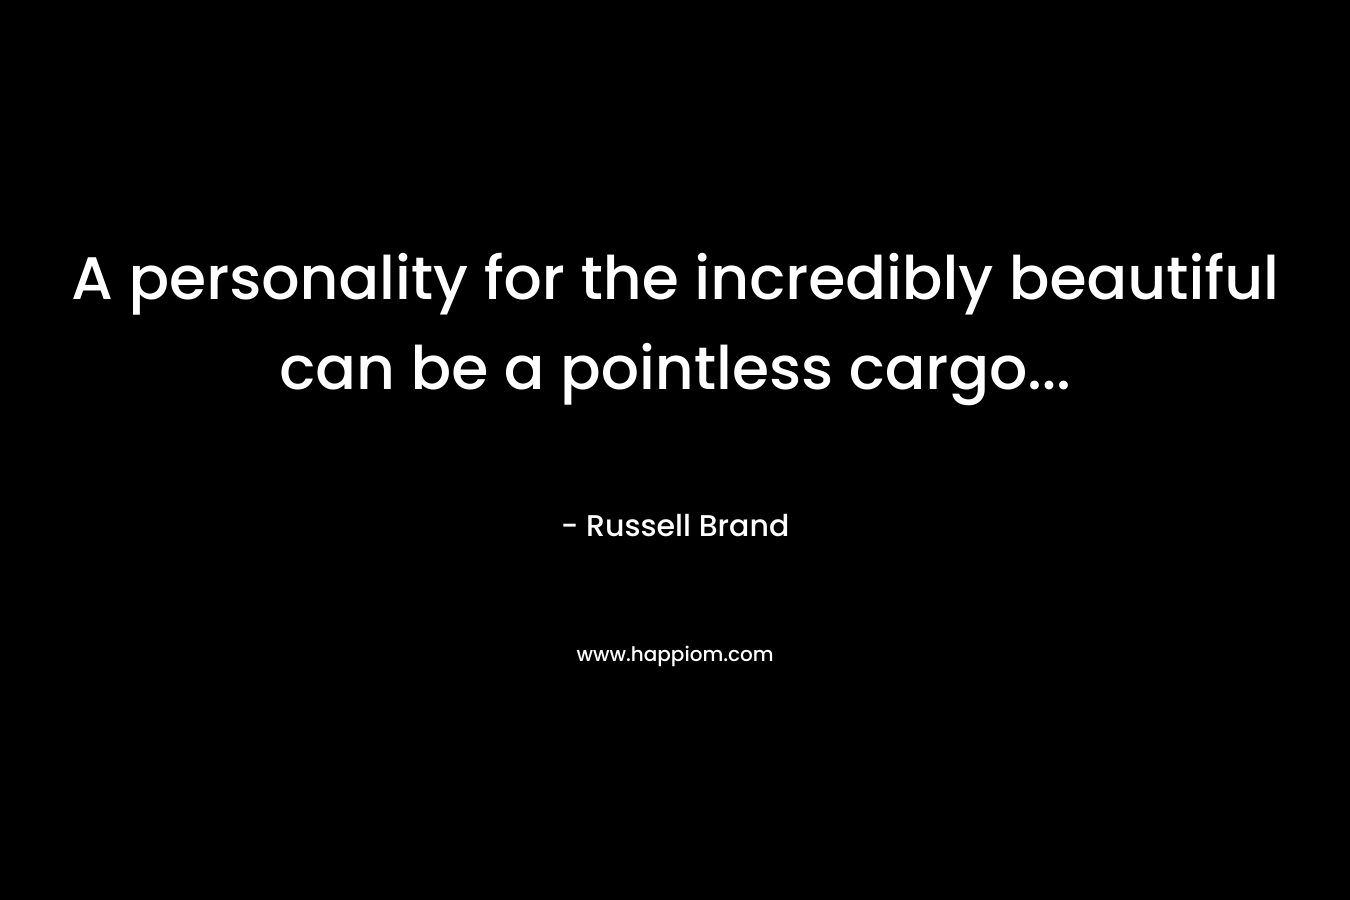 A personality for the incredibly beautiful can be a pointless cargo...